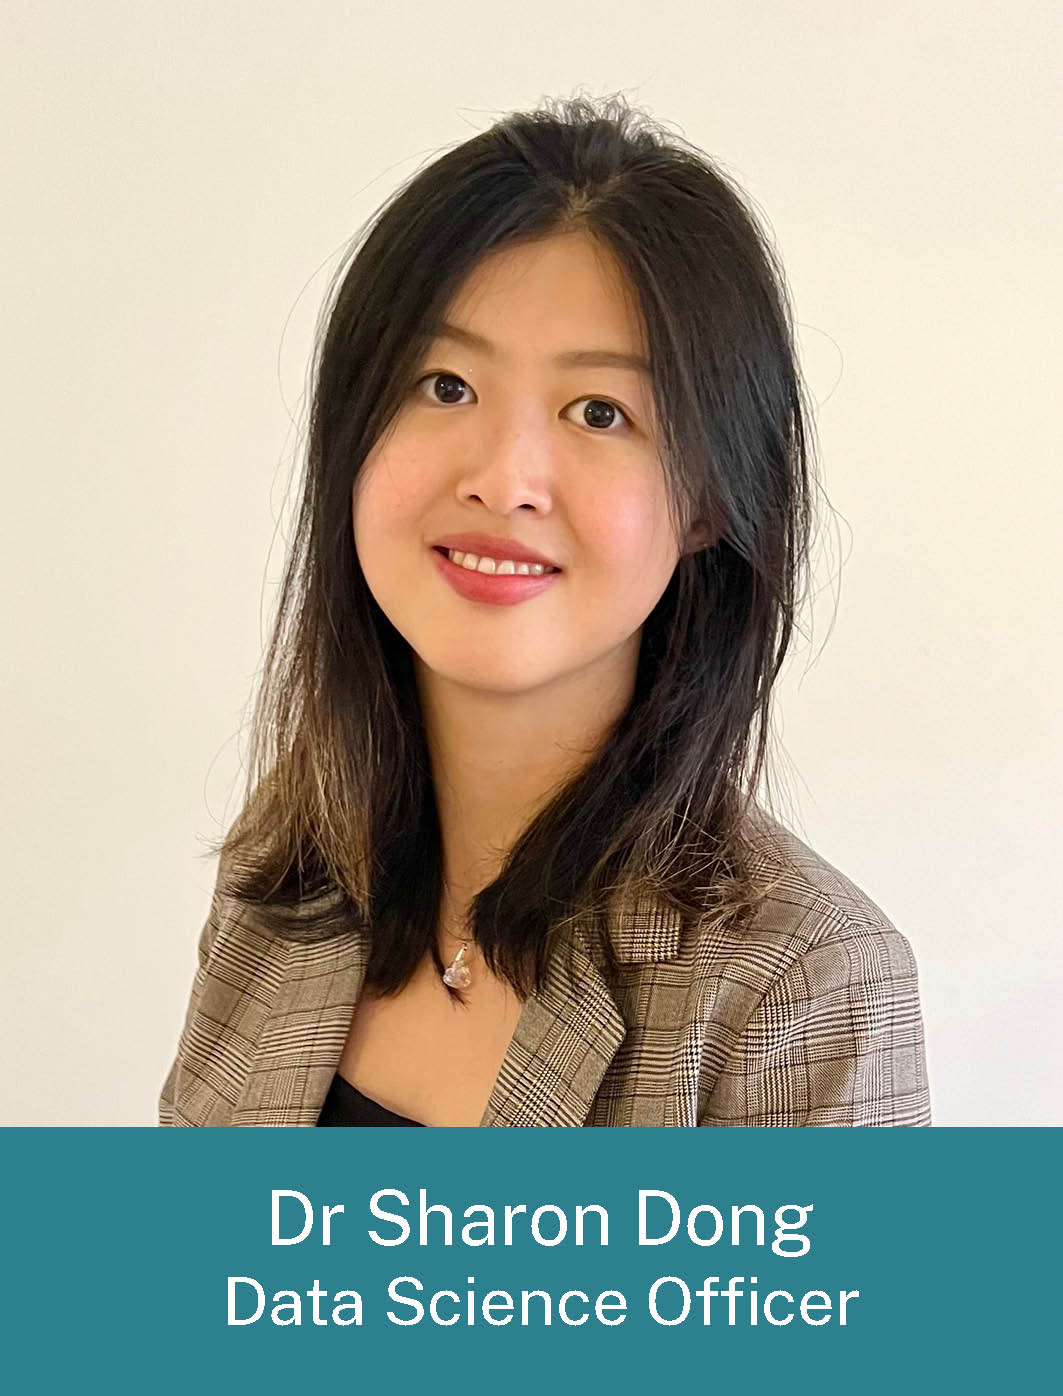 Sharon Dong, Data Science Officer